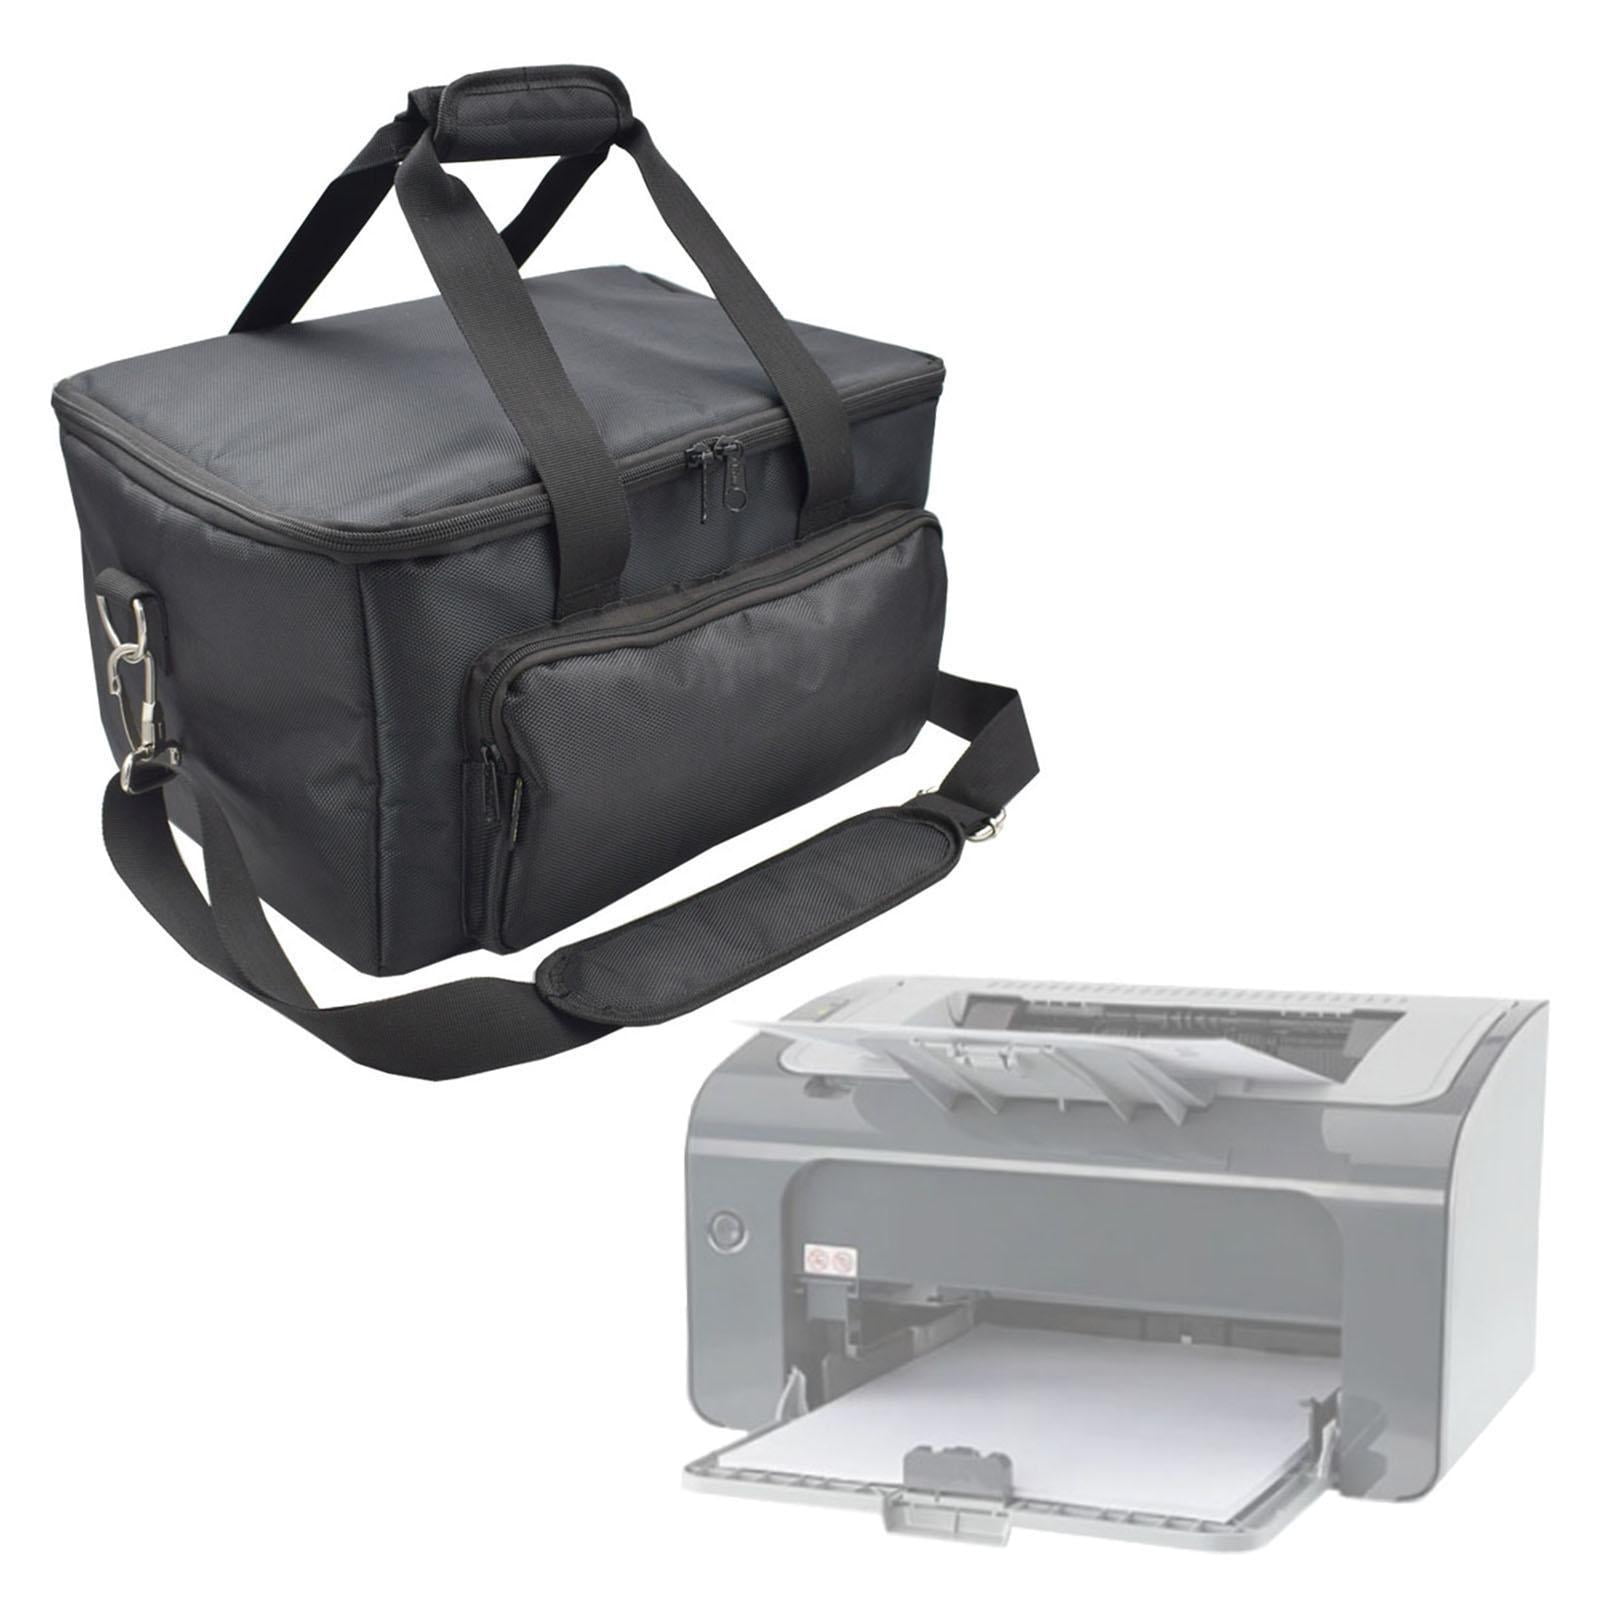  Durable Printer Carrying Bag, High Capacity Laptop Carrying Bag  with Shoulder and Trolley Strap, Heavy Duty Portable Printer Carrying Case,  Modern Mobile Printer Carry Bags for Travel Business : Electronics